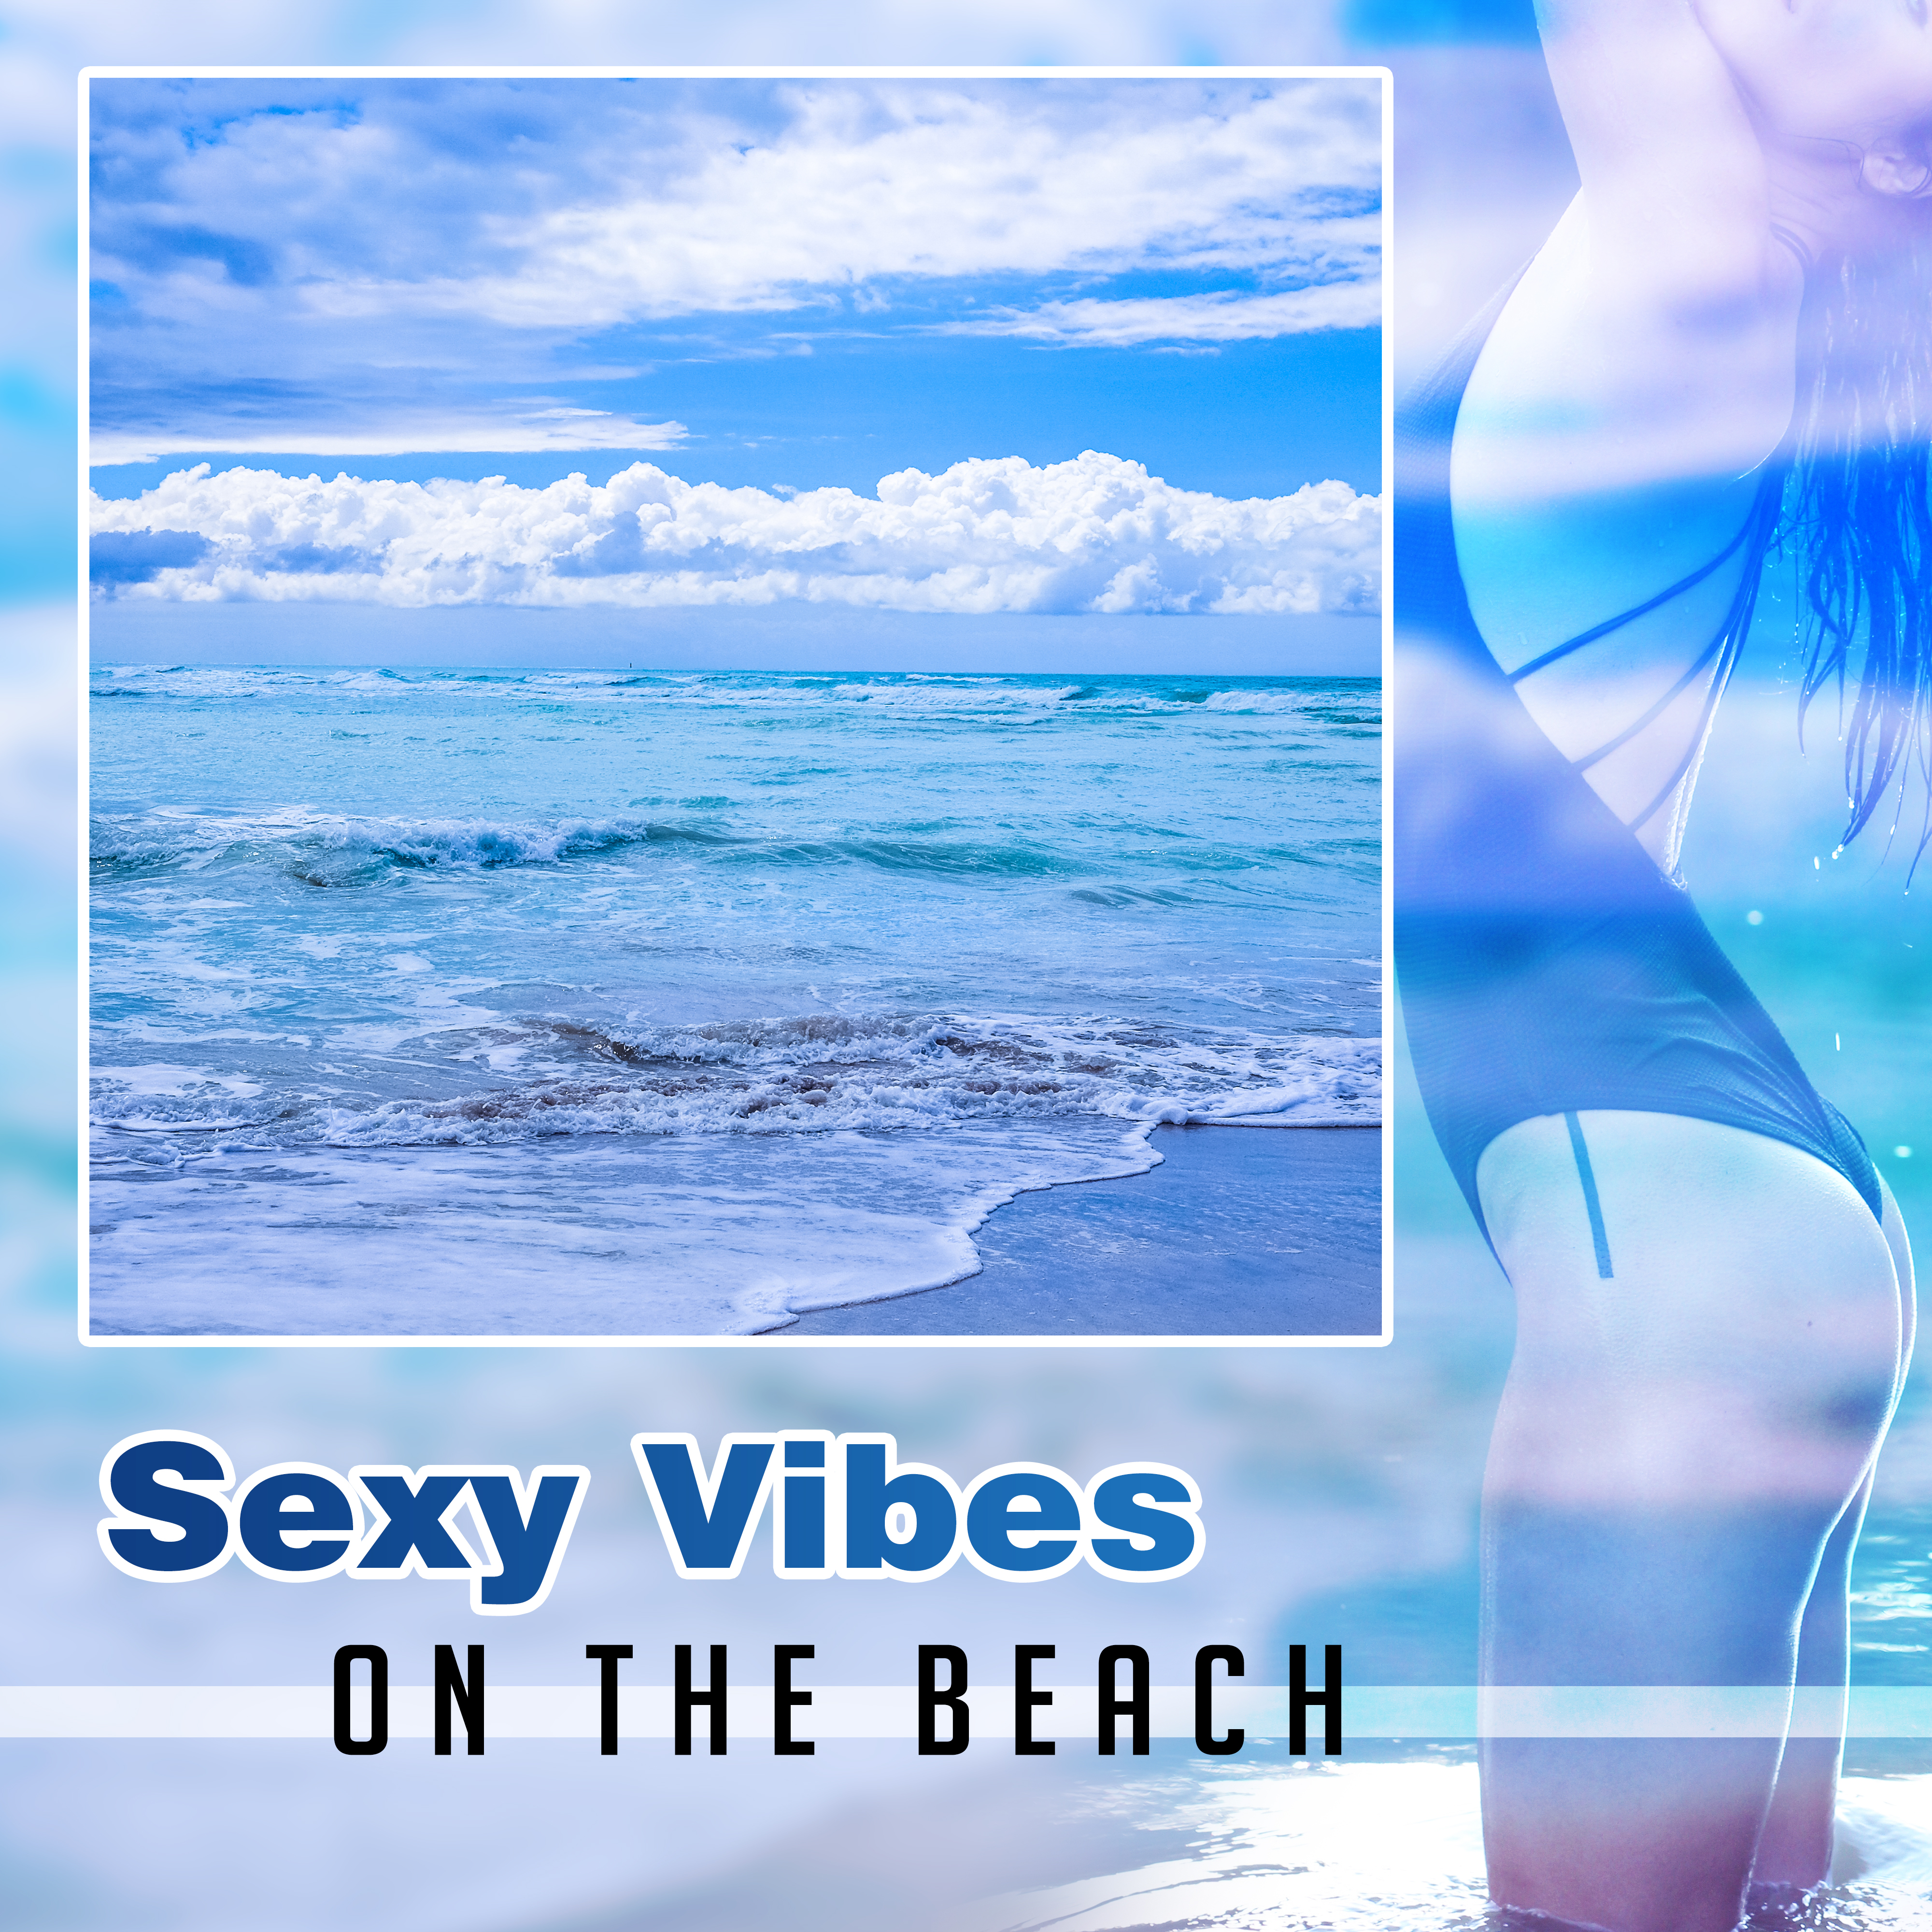 **** Vibes on the Beach – Party Night, Ibiza Summertime, Sensual Dance, **** Chill, *** on the Beach, Ibiza Lounge